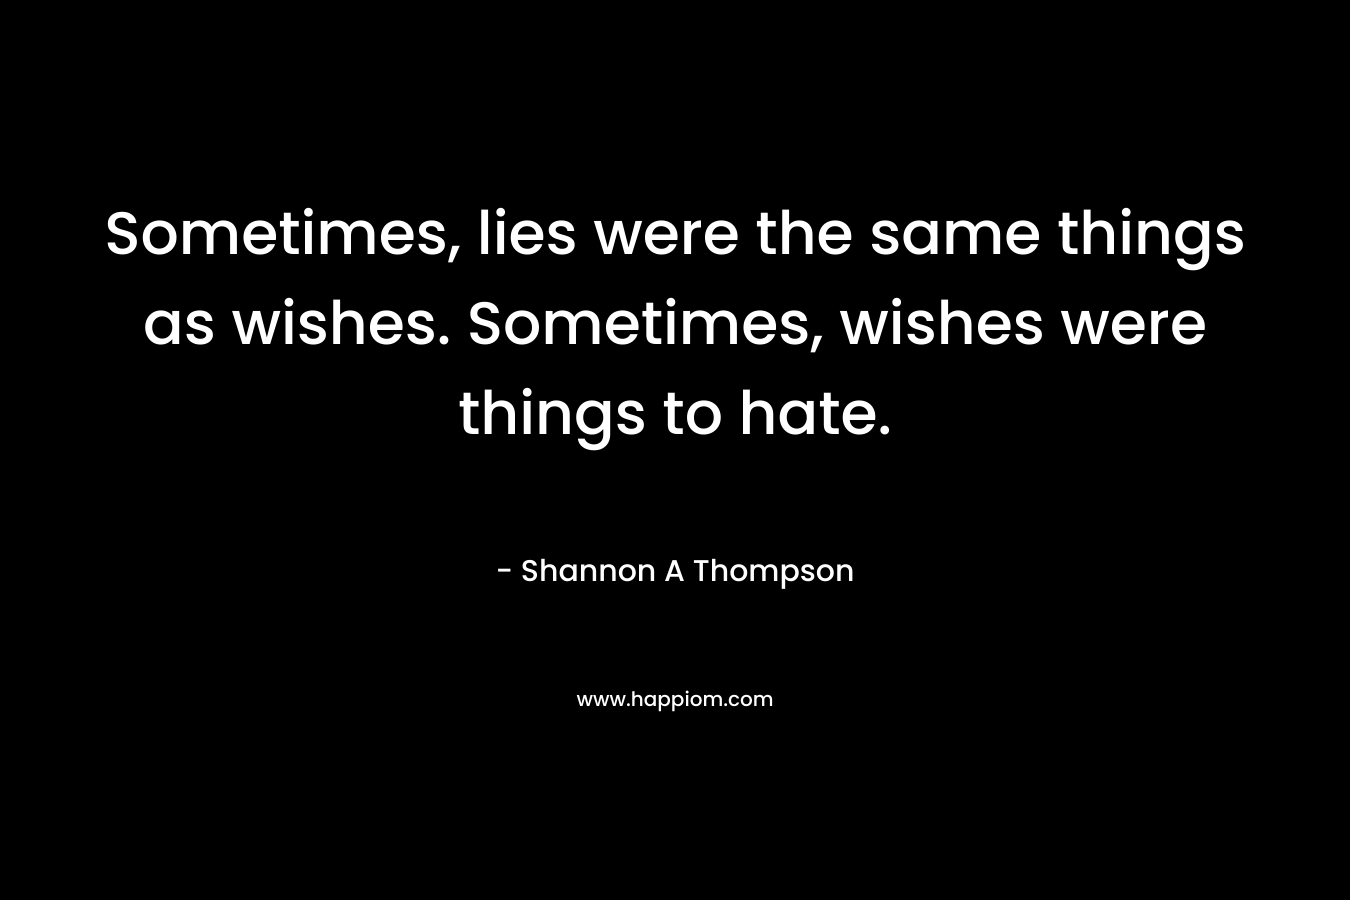 Sometimes, lies were the same things as wishes. Sometimes, wishes were things to hate.